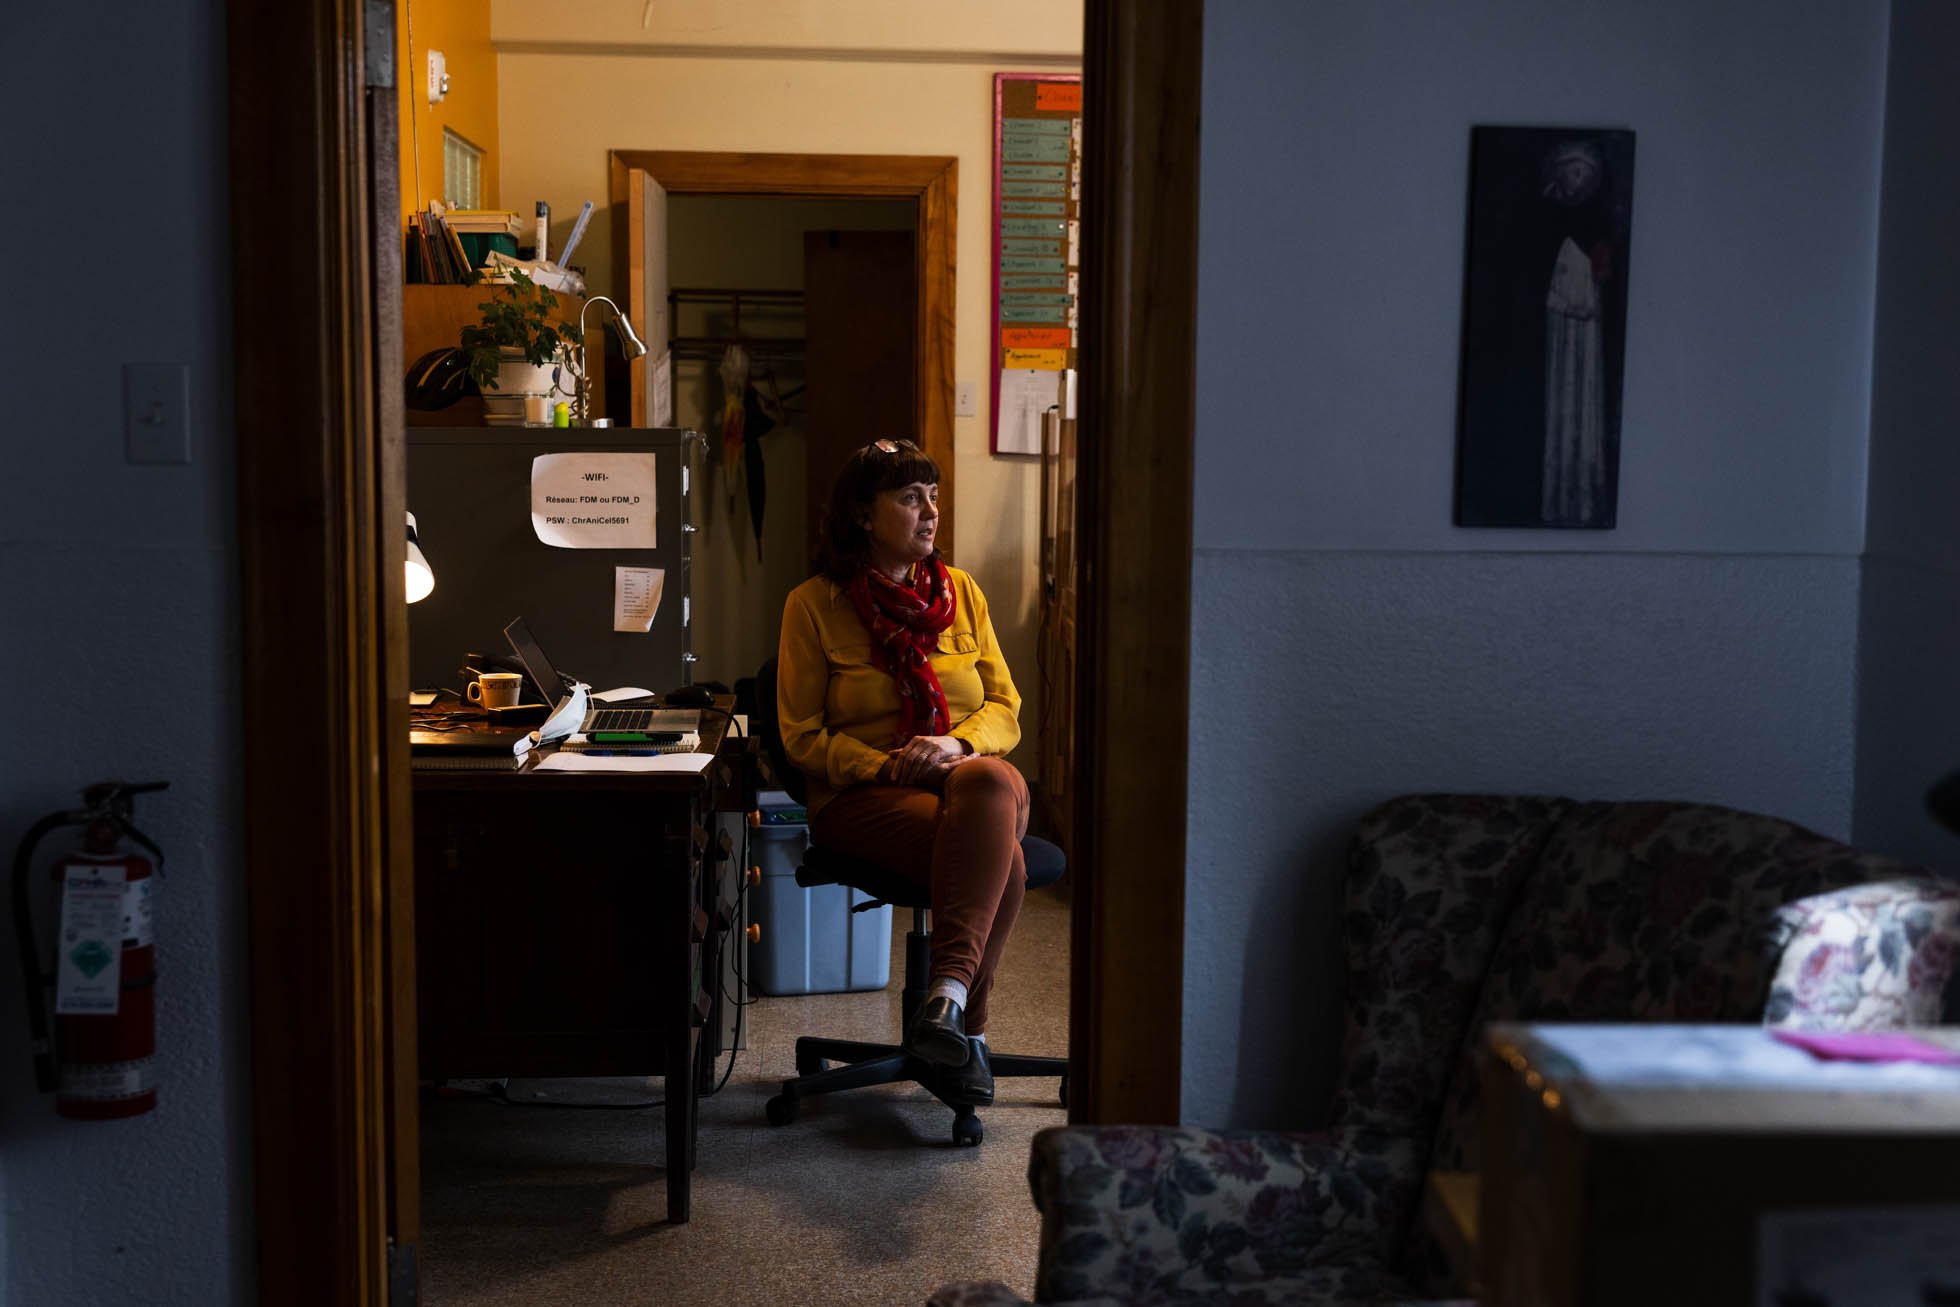  Foyer du monde, a community organisation in Montréal, offers temporary housing to migrants and asylum seekers. (Portraits for Fondation Béati 2022) 